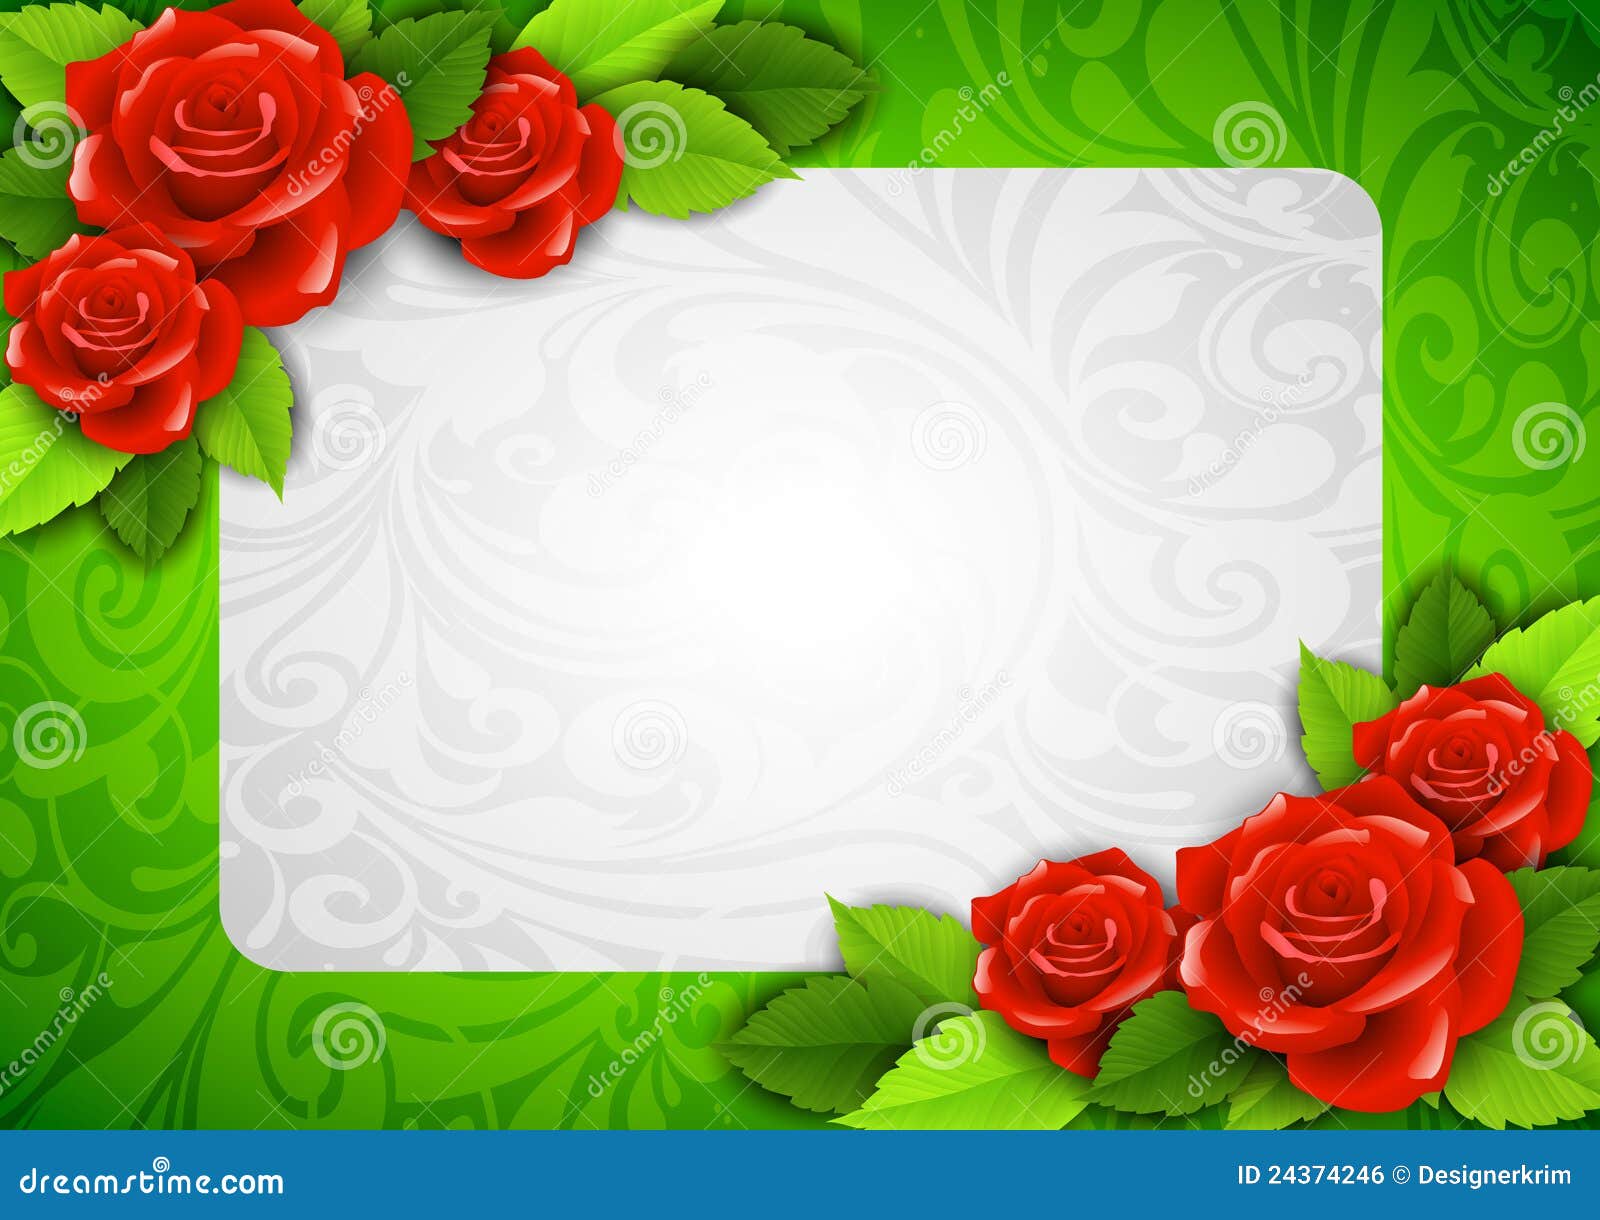 Background With Roses And A Place For Text Stock Vector Image